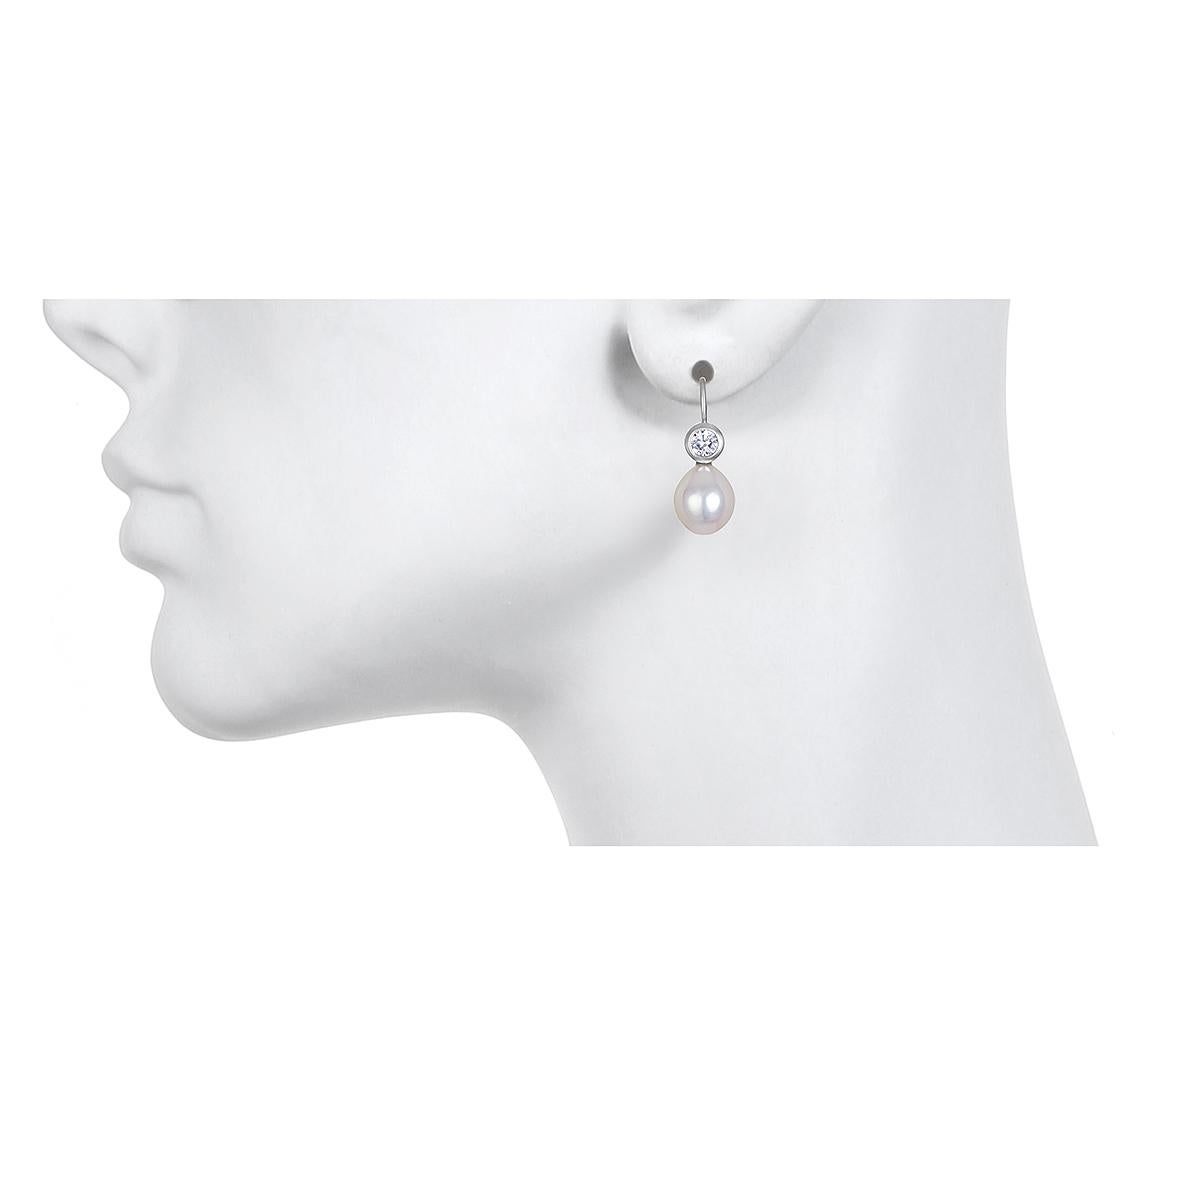 Set in 18k white gold, White Sapphire is paired with white freshwater pearls to create a pair of modern-day classic drop earrings.  Matte-finished.
Casual or corporate, the clean design is flattering and simply beautiful!  French ear wires.  

Model